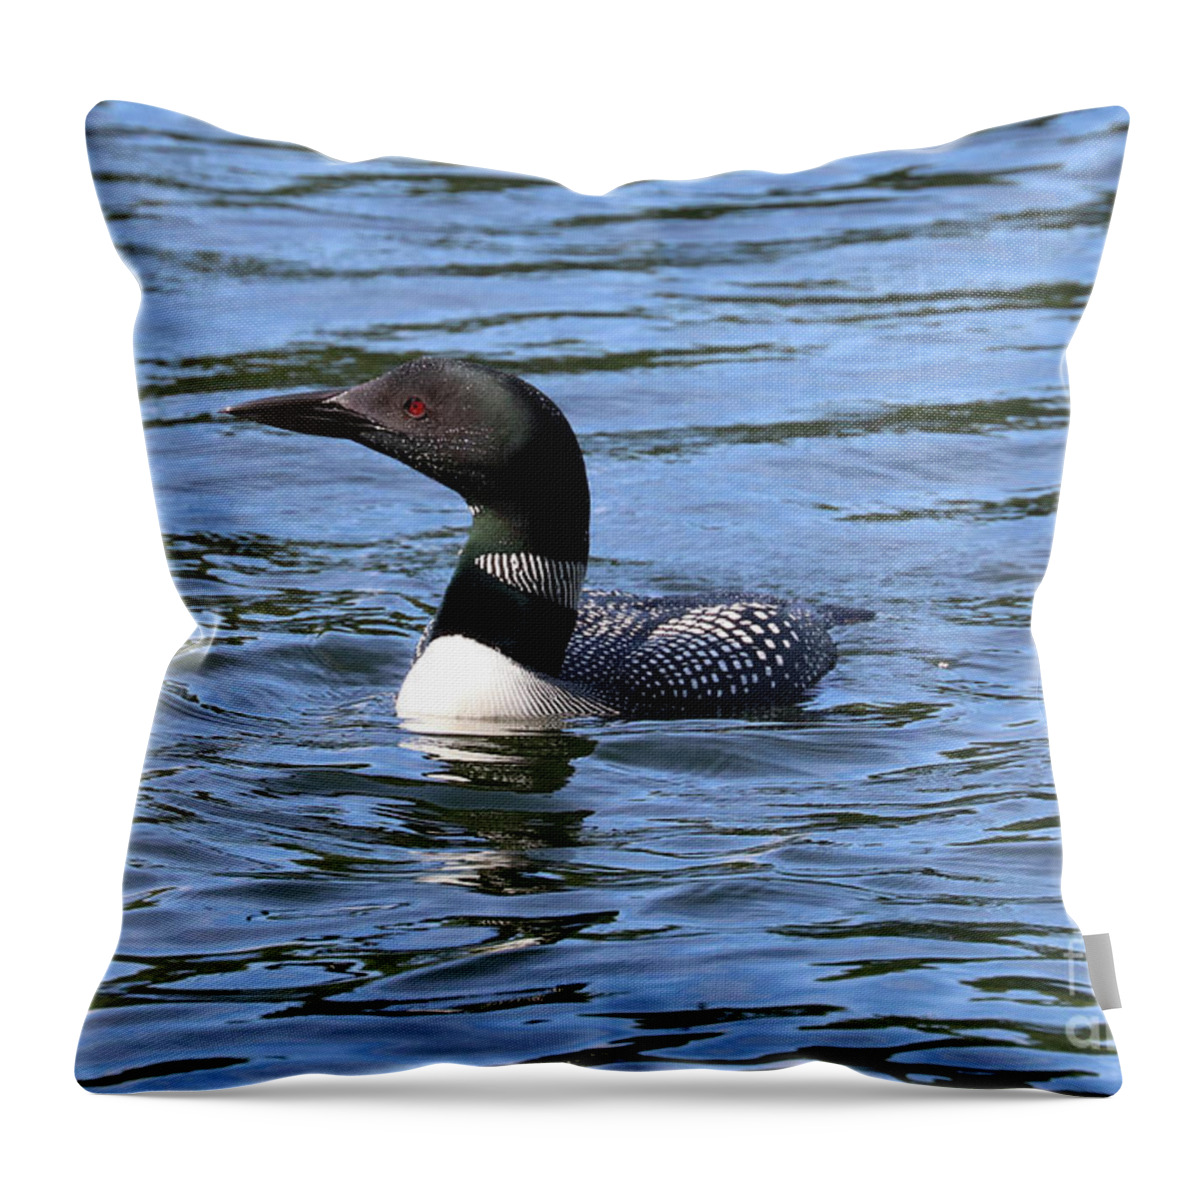 Common Loon Throw Pillow featuring the photograph Maine Common Loon - Woodbury Pond by Sandra Huston